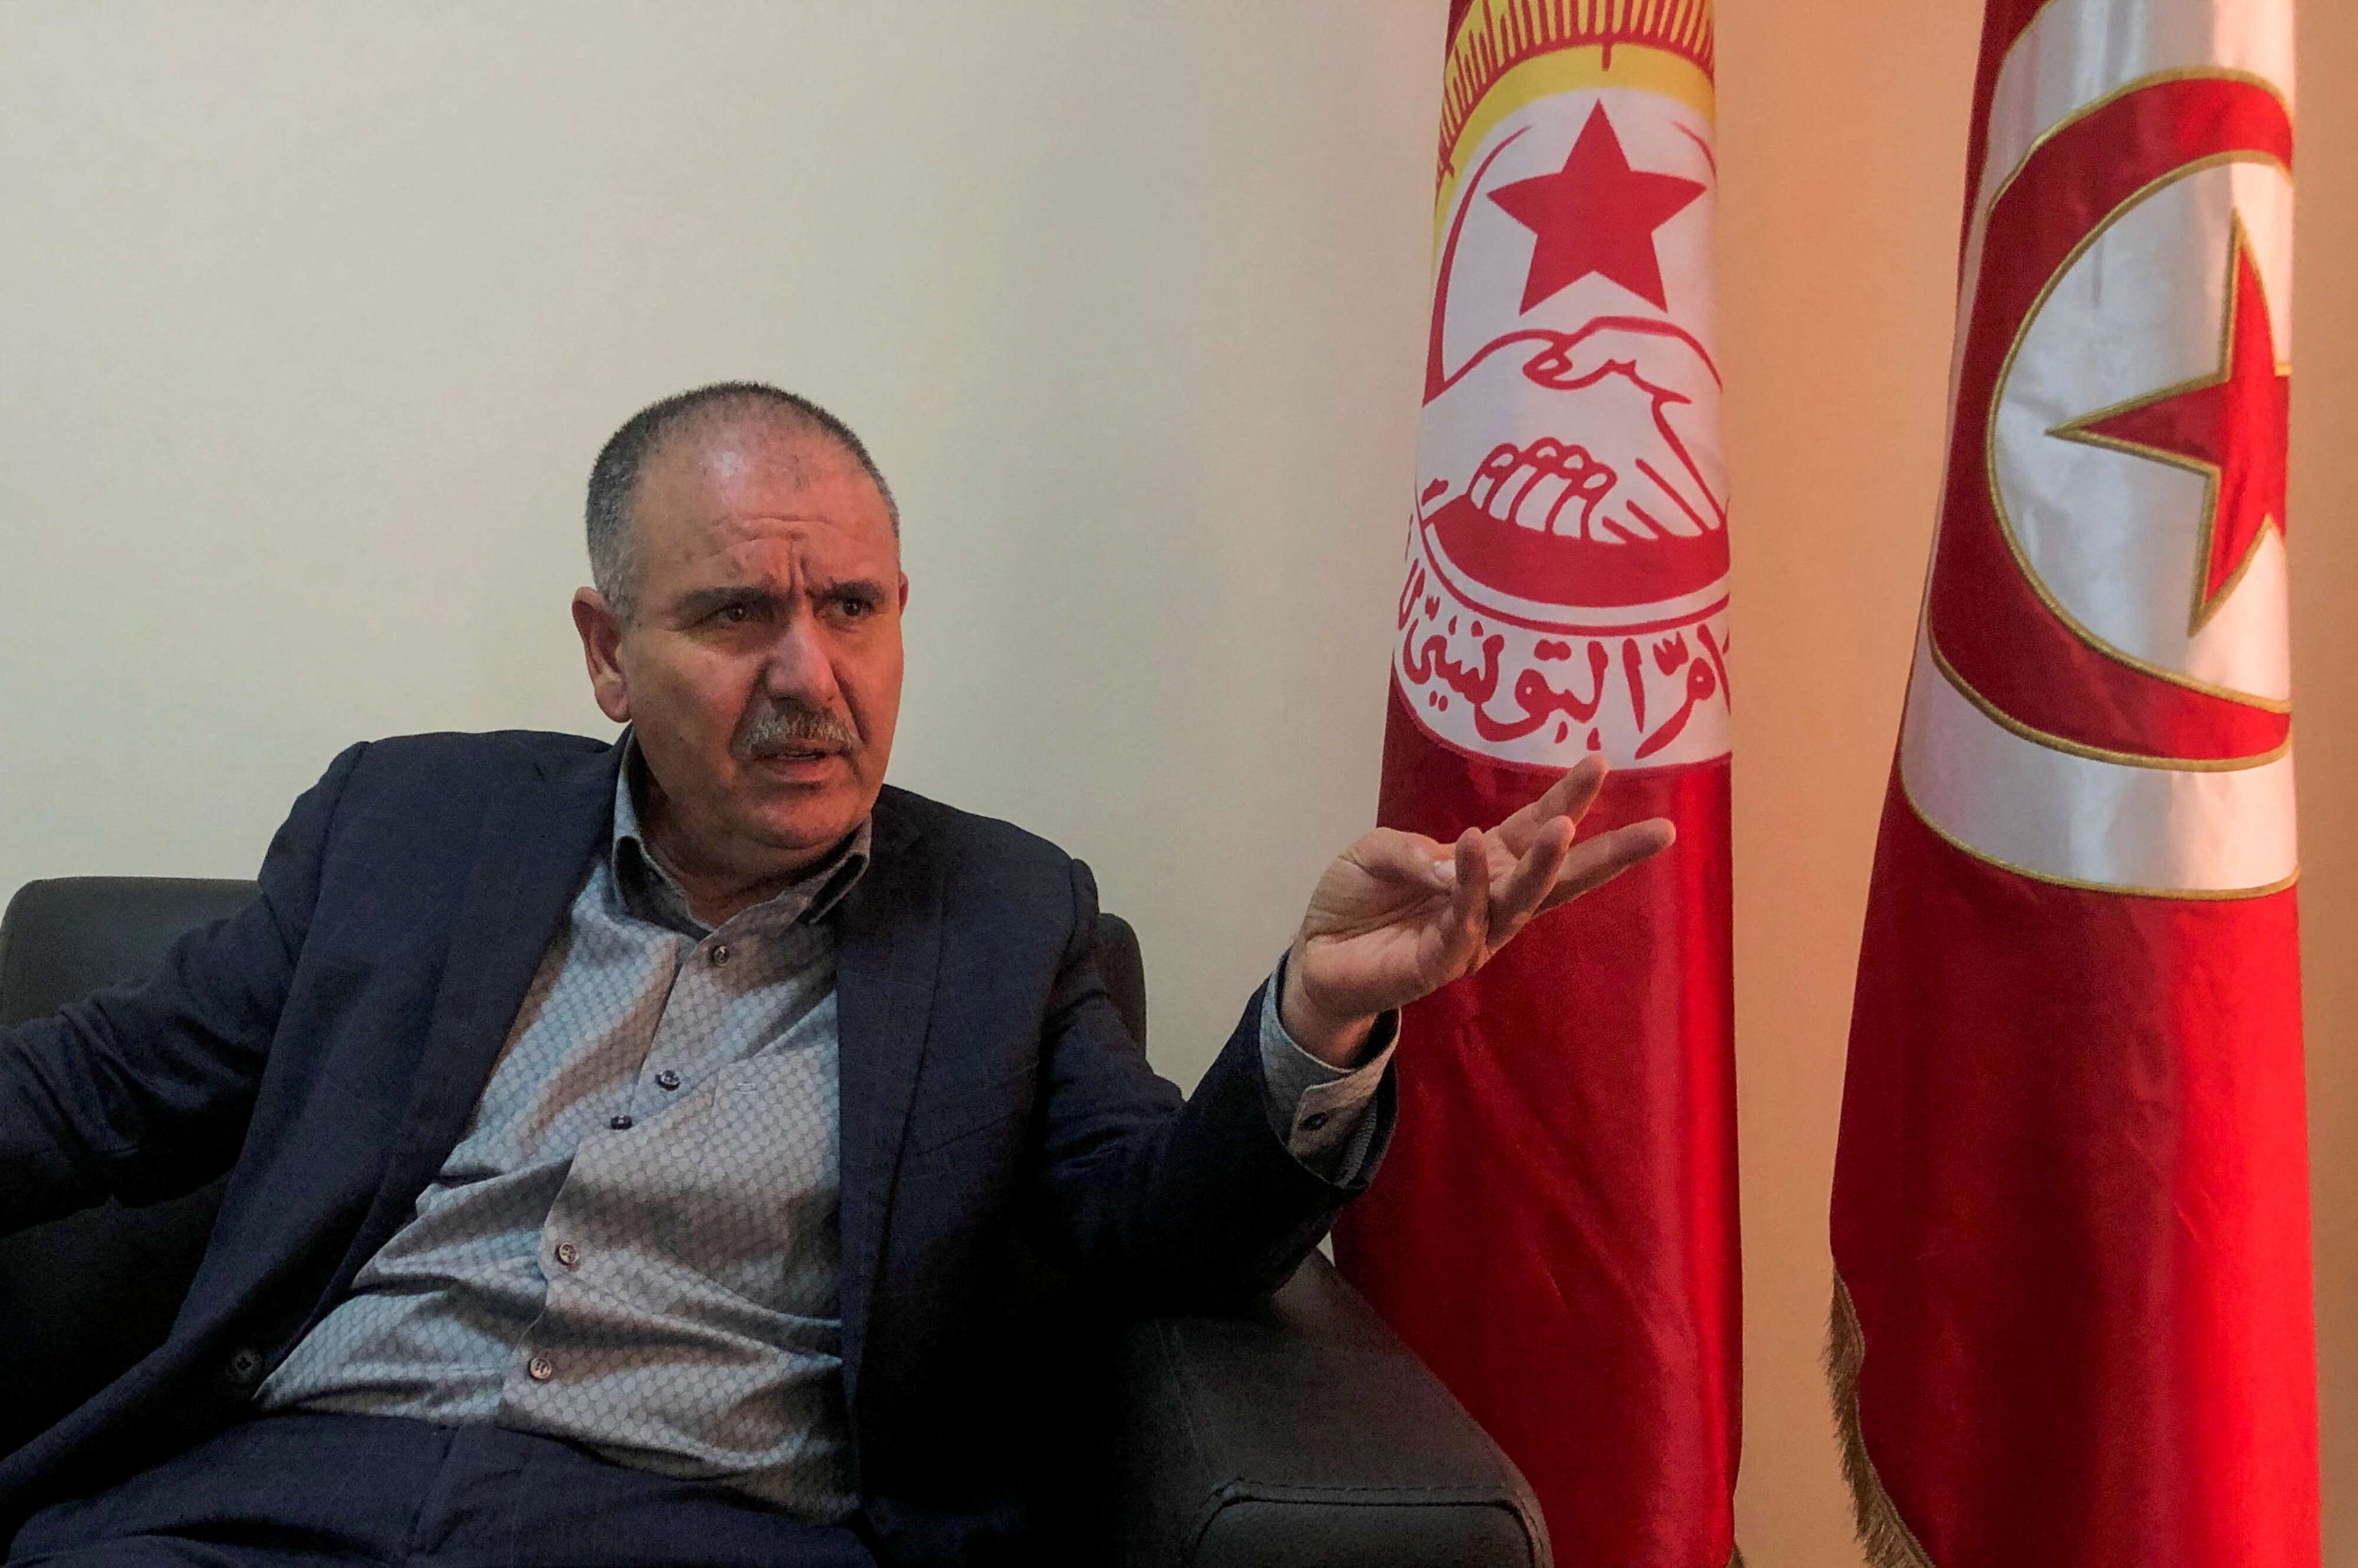 FILE PHOTO: Noureddine Taboubi, Secretary General of the Tunisian General Labour Union (UGTT), speaks during an interview with Reuters in Tunis